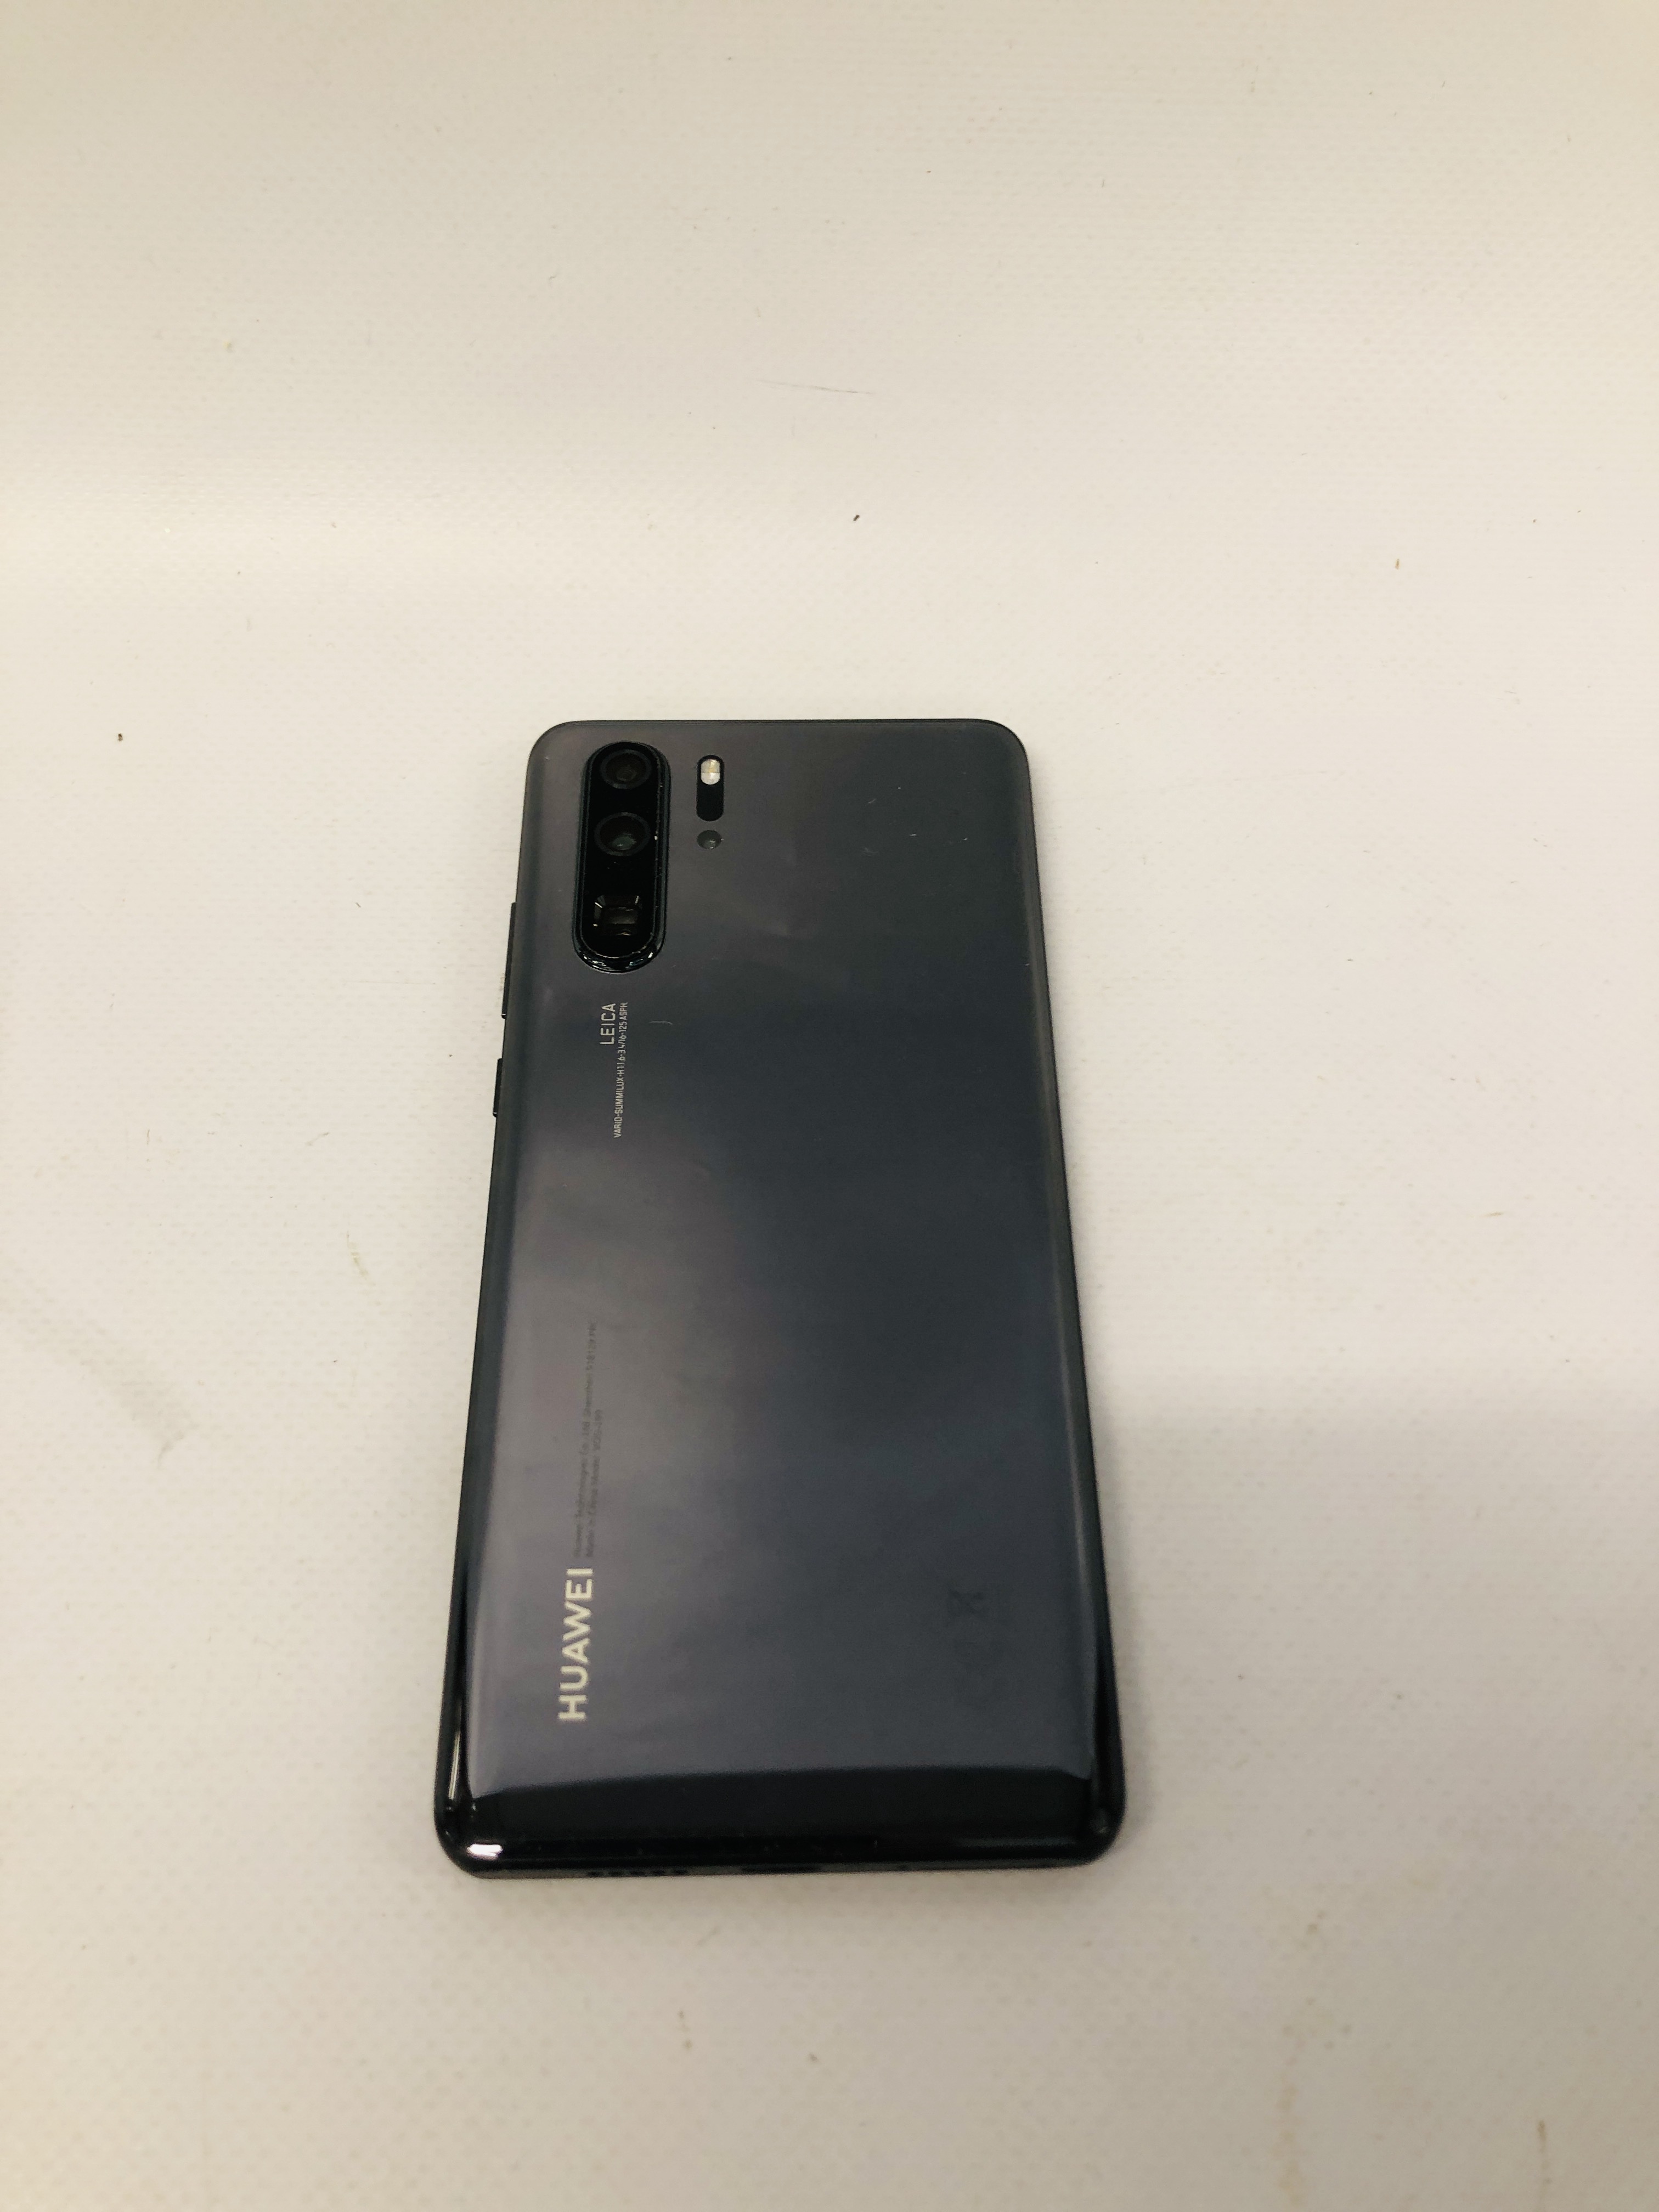 A HUAWEI VOG-L09 SMARTPHONE - SOLD AS SEEN - NO GUARANTEE OF CONNECTIVITY - Image 5 of 5